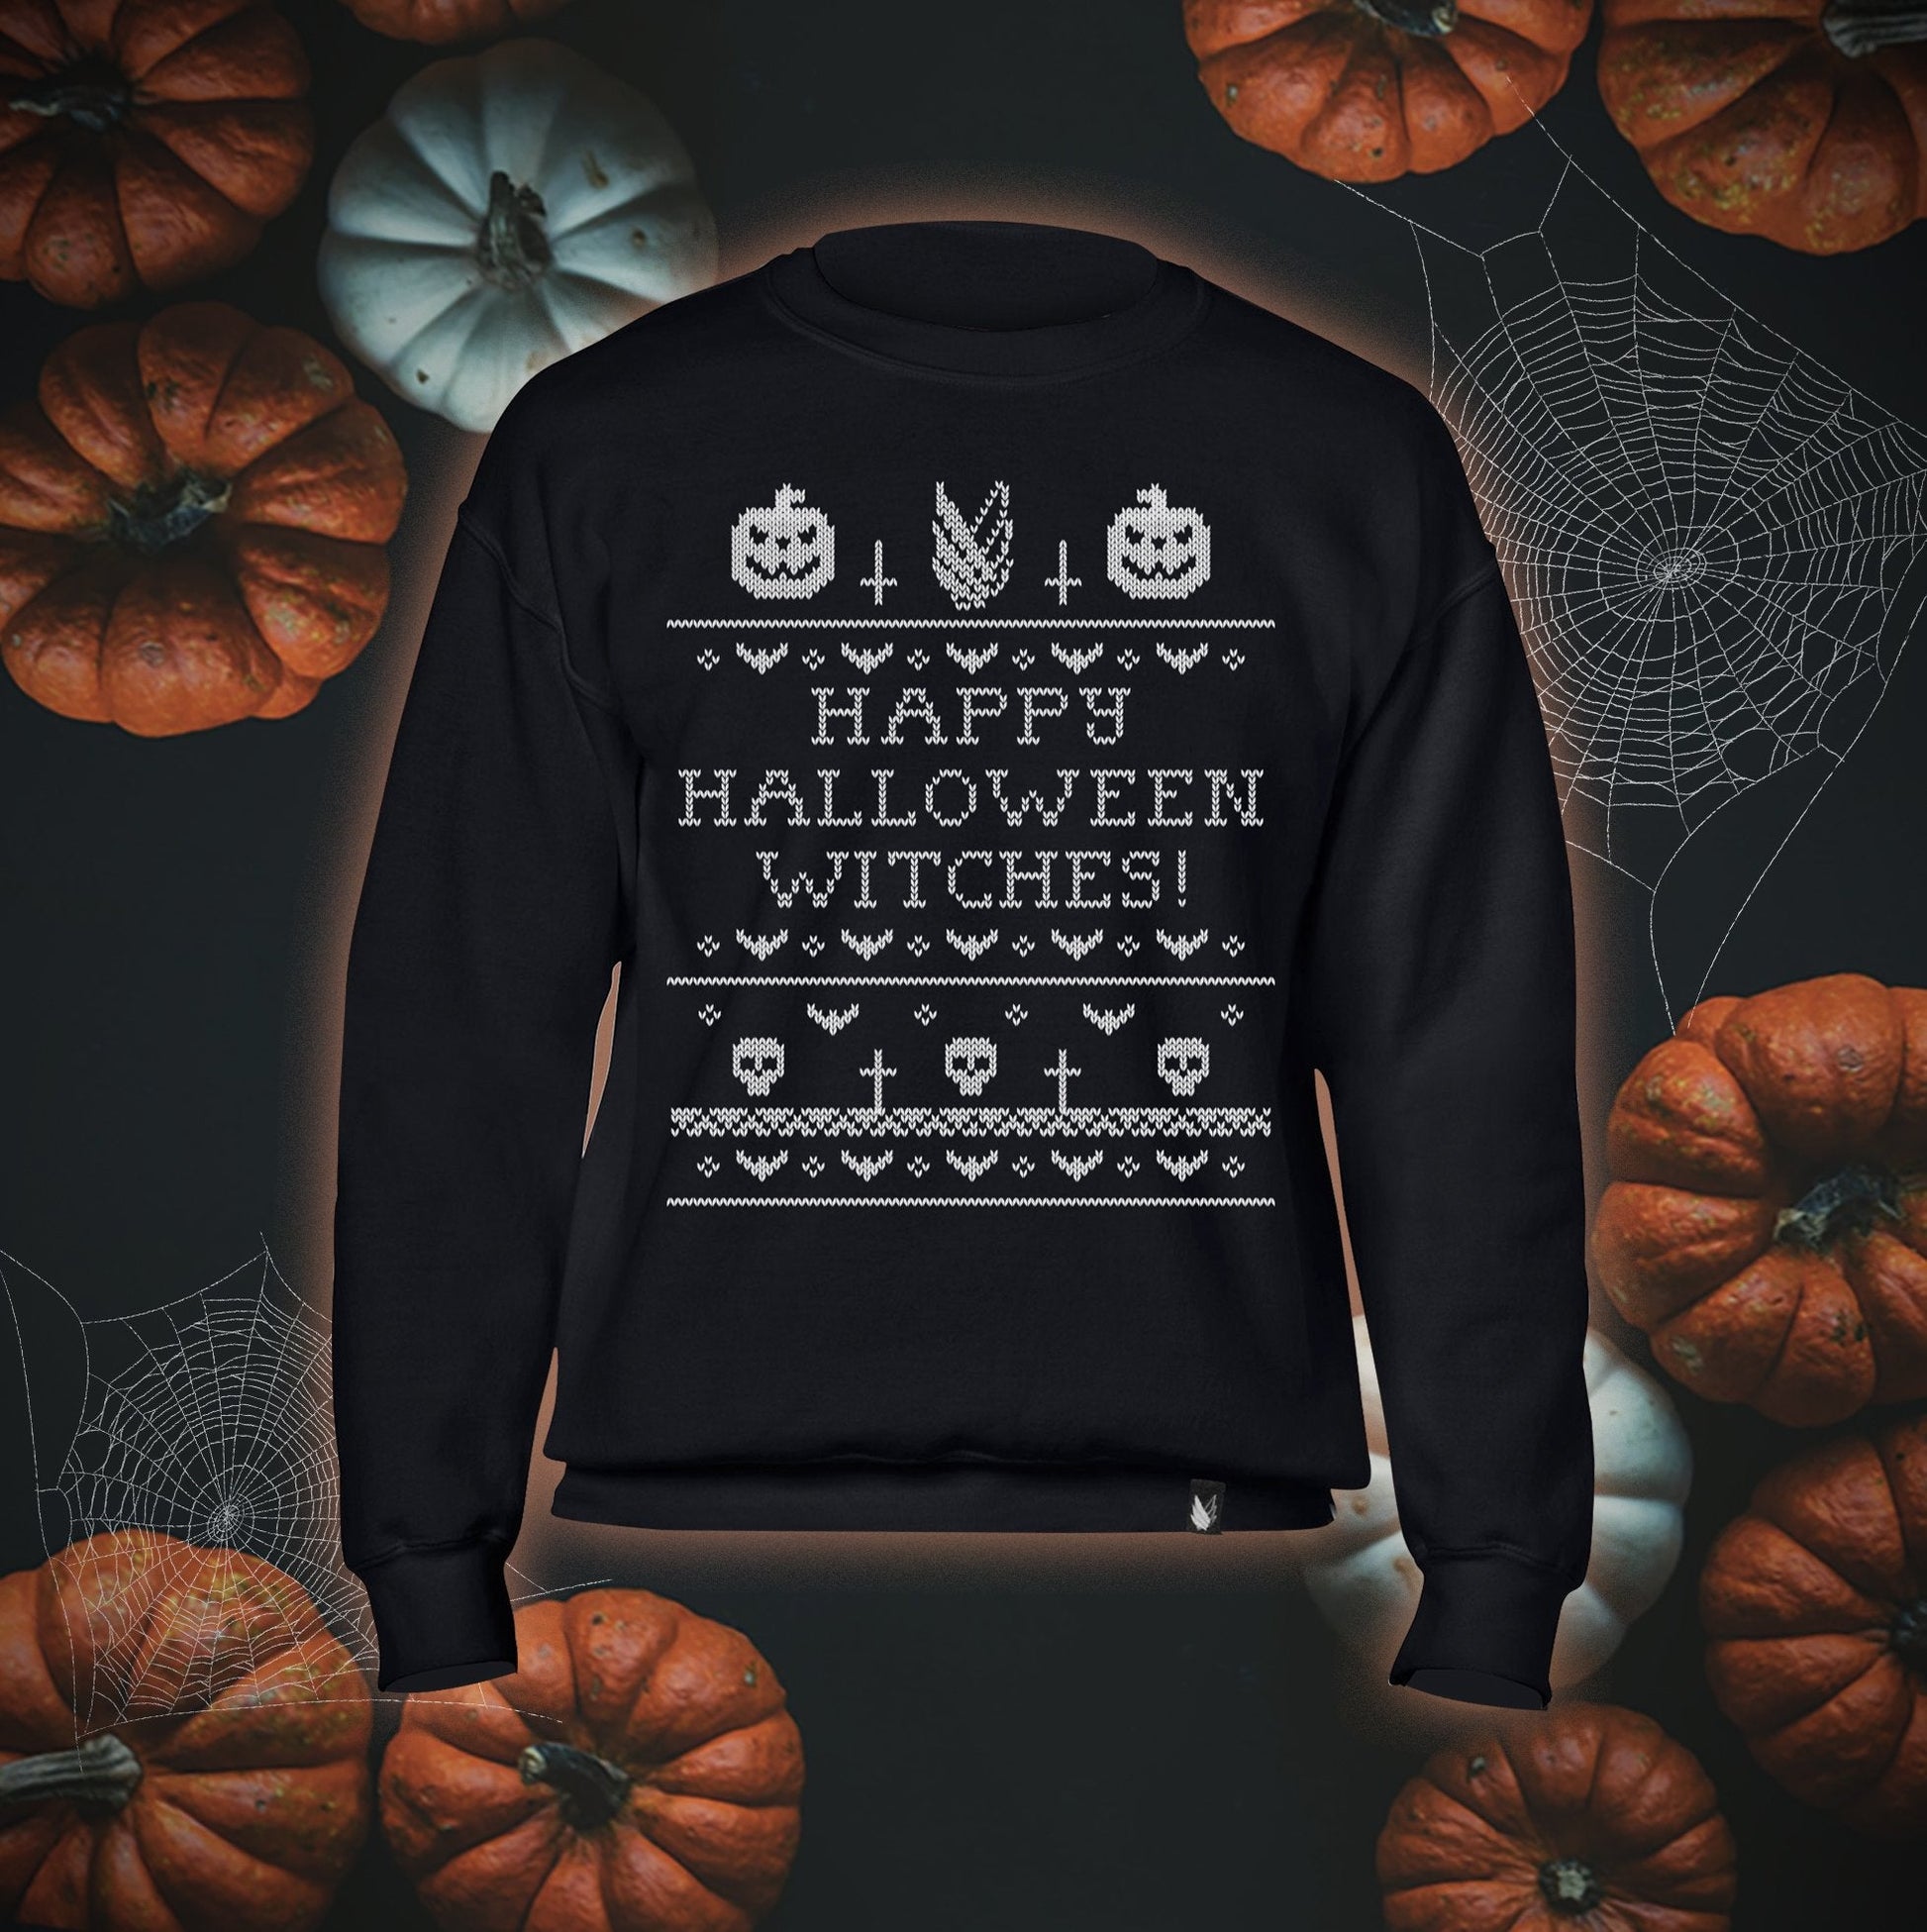 Happy Halloween witches - Sudadera - Stockholm Co. - Sudadera - halloween, otros, sudadera, unisex